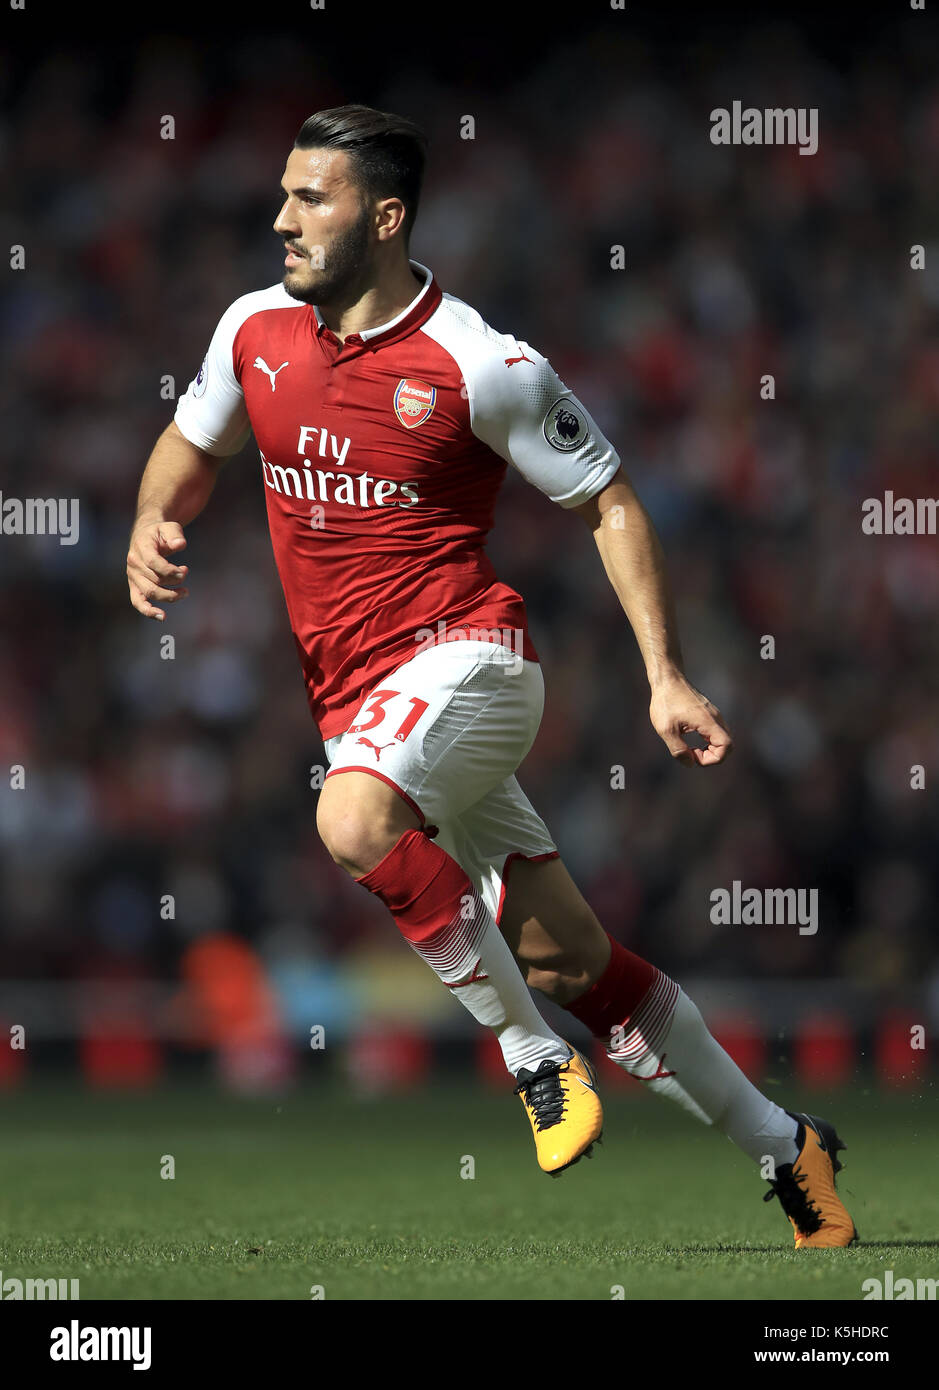 Arsenal's Sead Kolasinac during the Premier League match at the Emirates Stadium, London. PRESS ASSOCIATION Photo. Picture date: Saturday September 9, 2017. See PA story SOCCER Arsenal. Photo credit should read: John Walton/PA Wire. RESTRICTIONS: No use with unauthorised audio, video, data, fixture lists, club/league logos or 'live' services. Online in-match use limited to 75 images, no video emulation. No use in betting, games or single club/league/player publications. Stock Photo